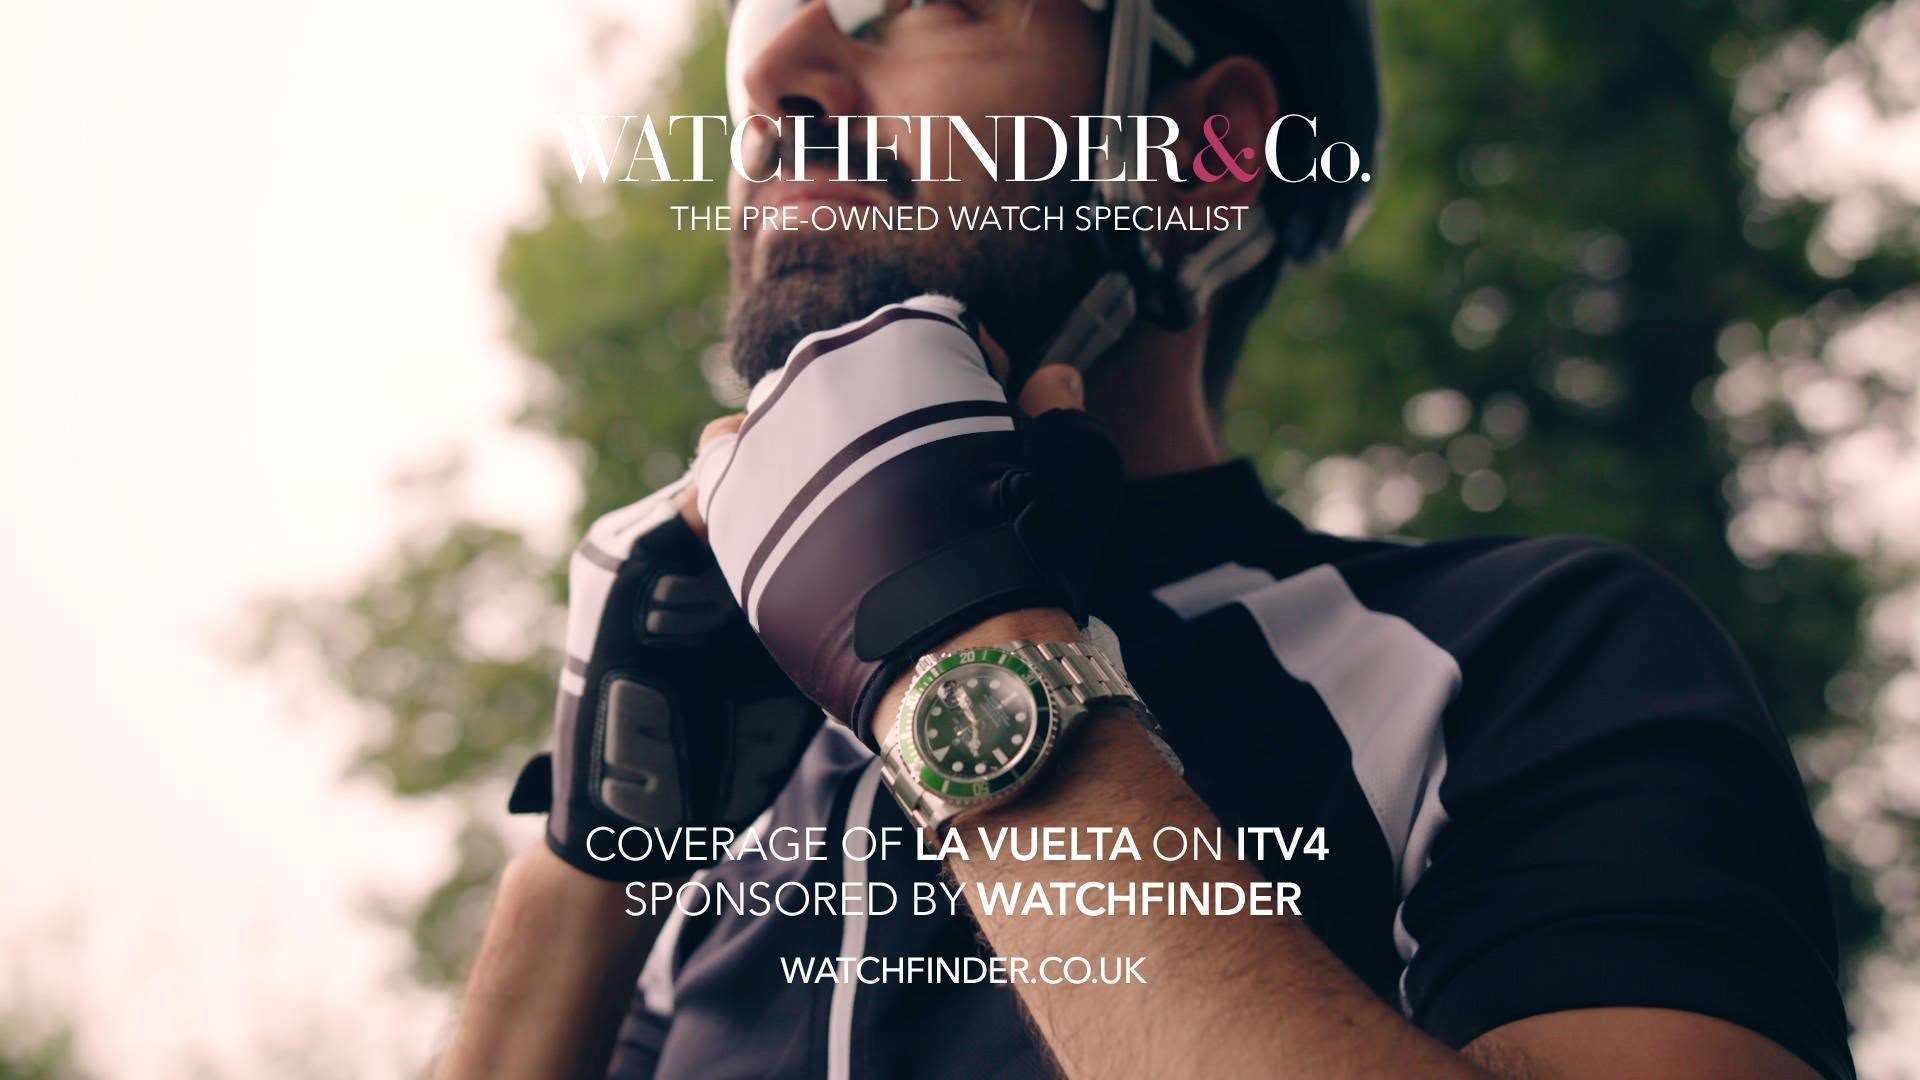 Watchfinder is sponsoring ITV 4's coverage of La Vuelta a España after experiencing a 30% spike in web traffic from supporting the Tour de France